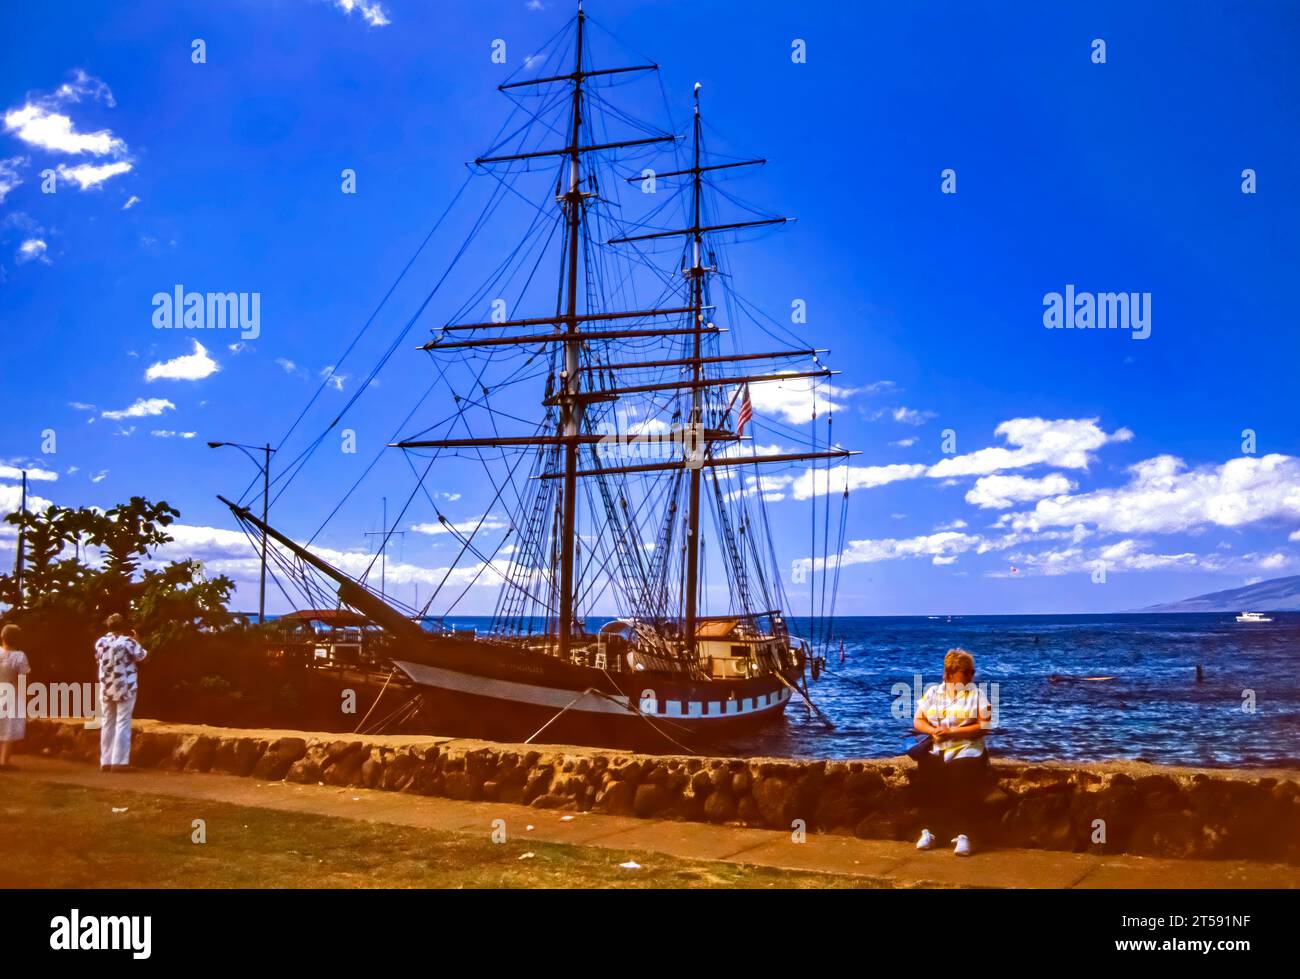 Lahaina, Maui, Hawaii, June 2, 1986 - Old Slide of Whaling Ship, The Carthaginian in Lahaina Harbor, Tied to Coral Pier, on a Beautiful Sunny Summer D Stock Photo